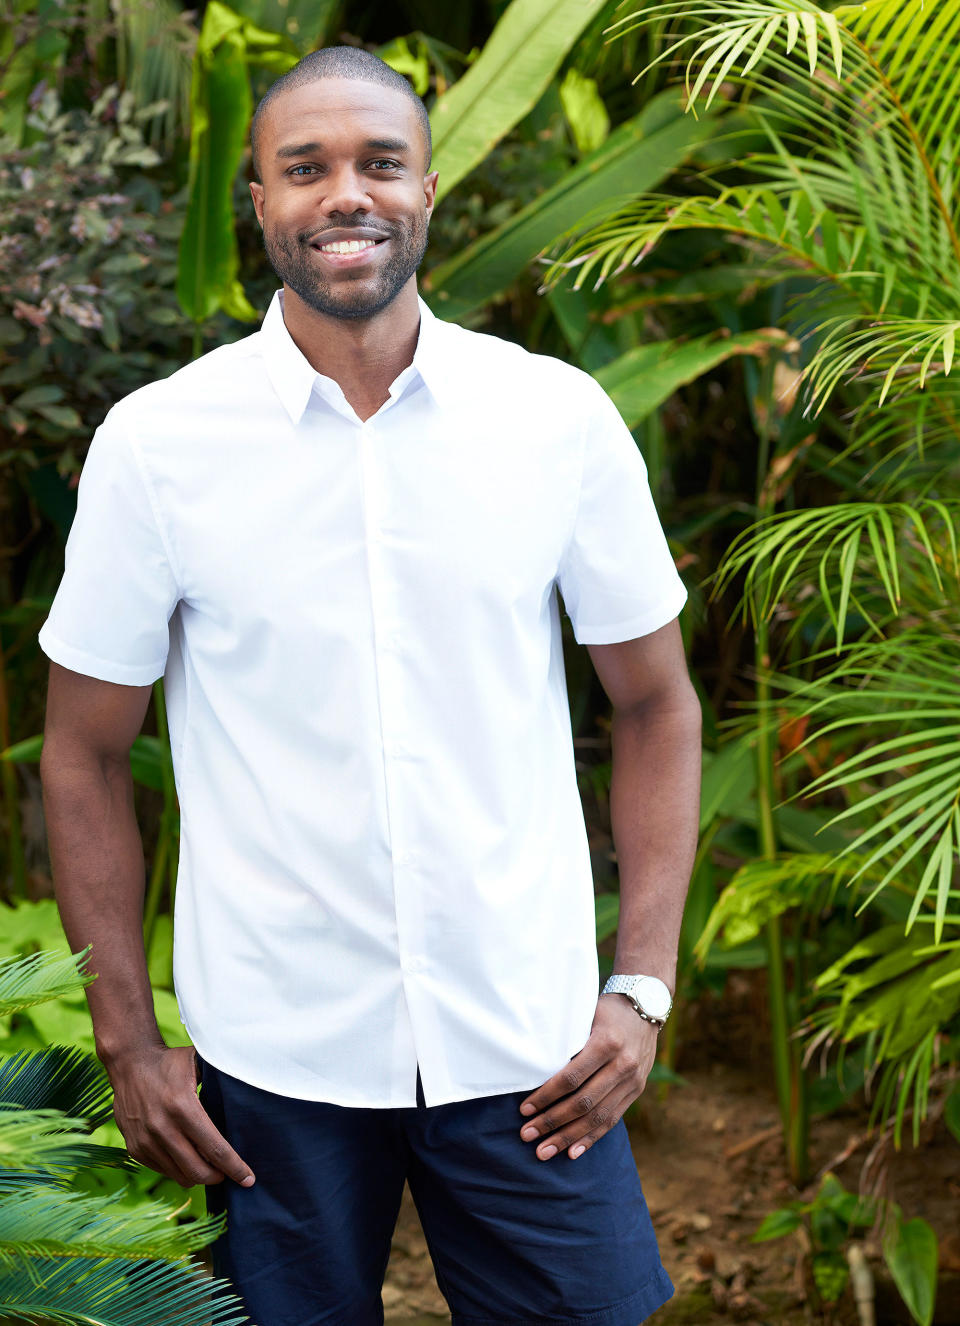 Bachelor in Paradise: DeMario Jackson Feels 'Vindicated' After Premiere